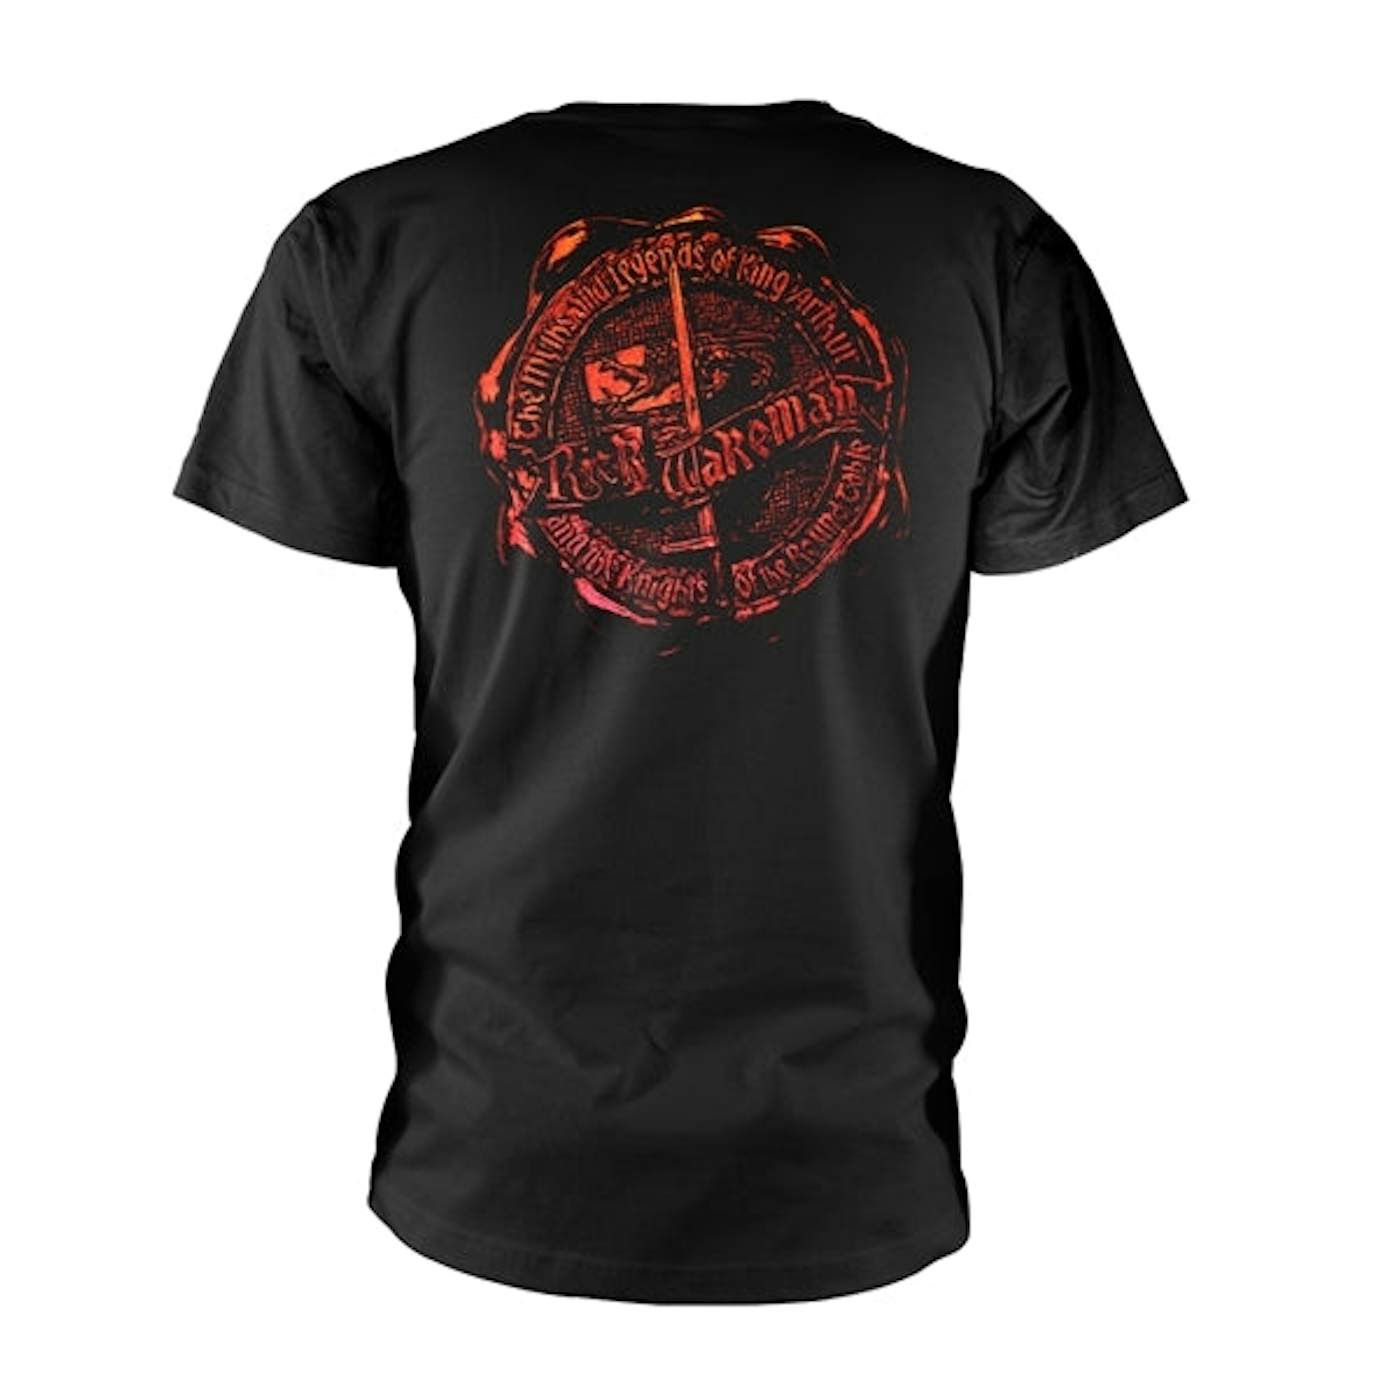 Rick Wakeman T Shirt - The Myths And Legends Of King Arthur And The Knights Of The Round Table